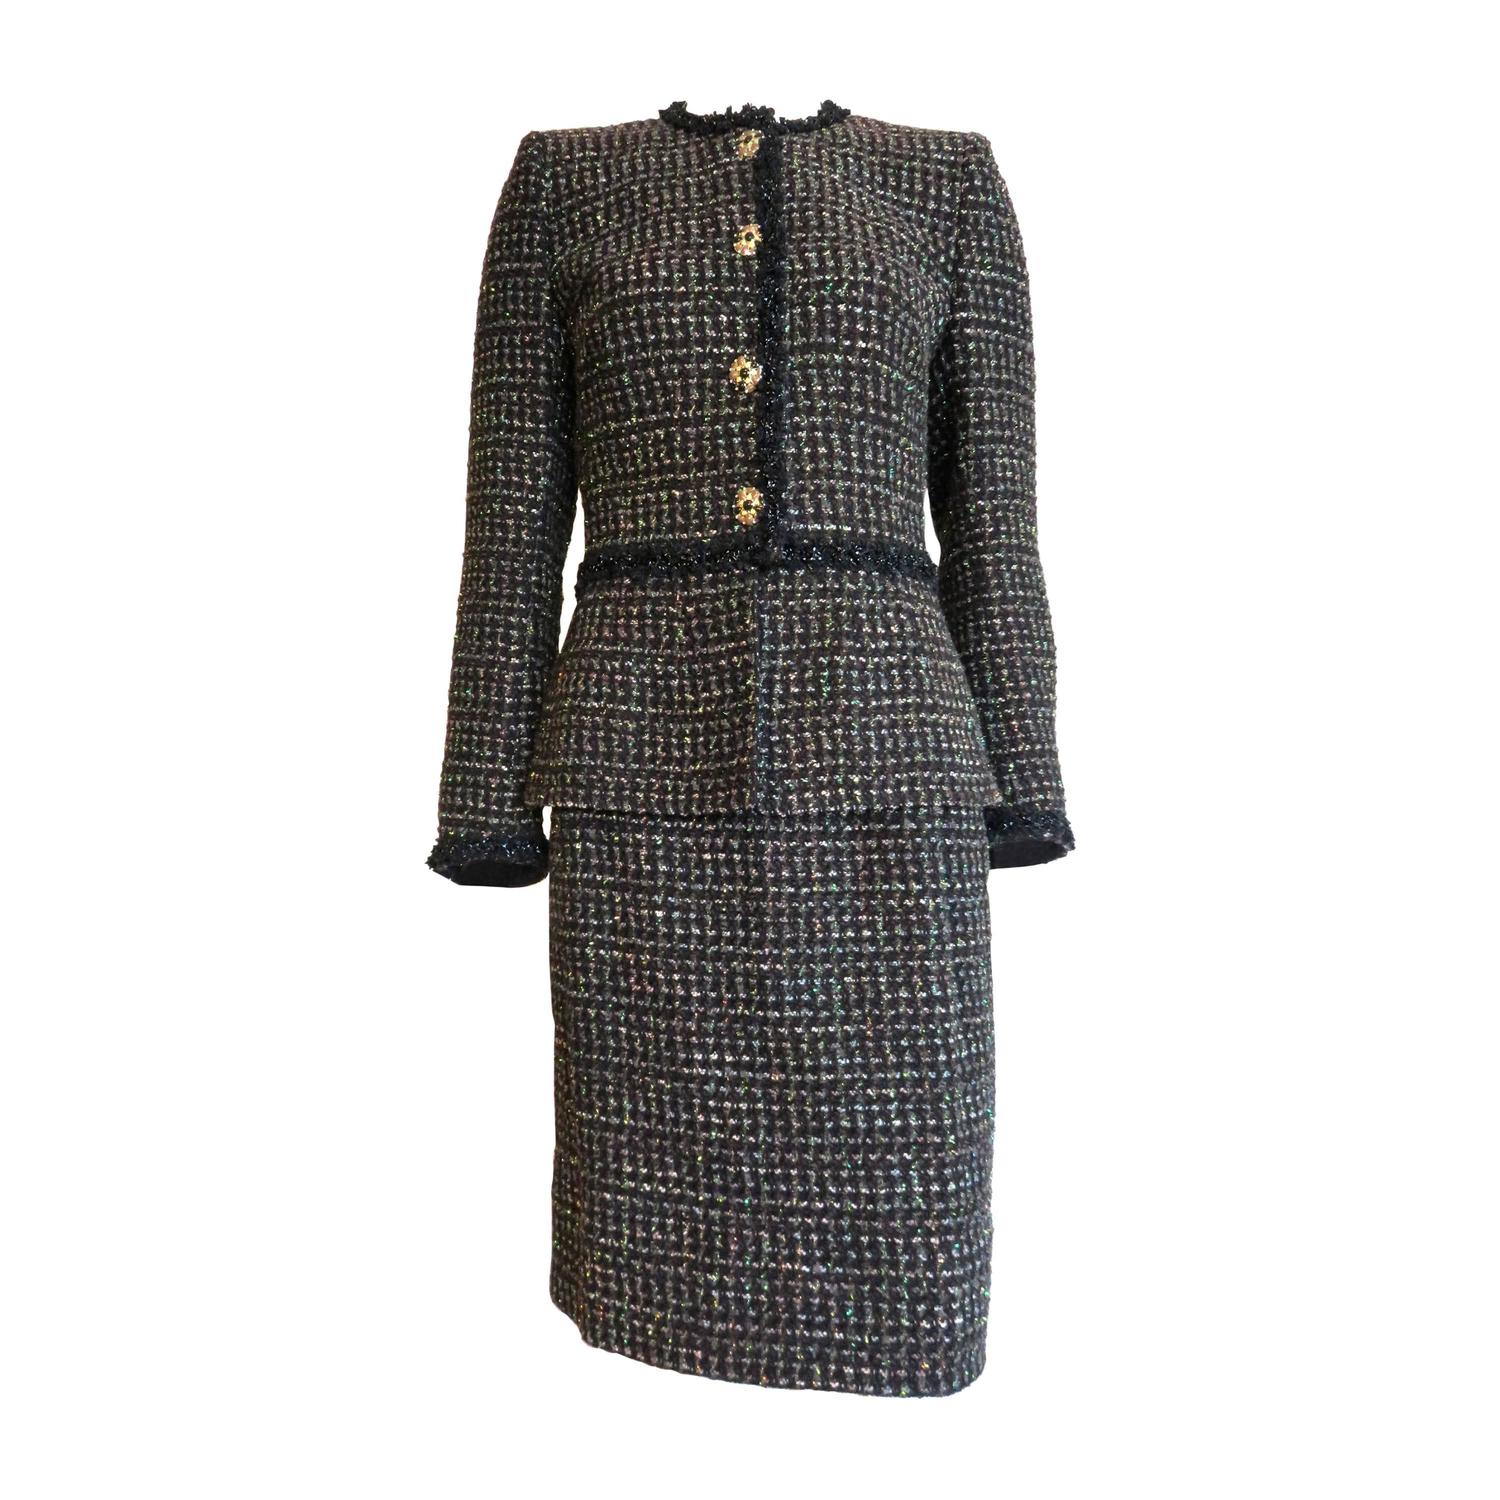 1980's CHANEL BOUTIQUE Metallic tweed evening skirt suit at 1stdibs